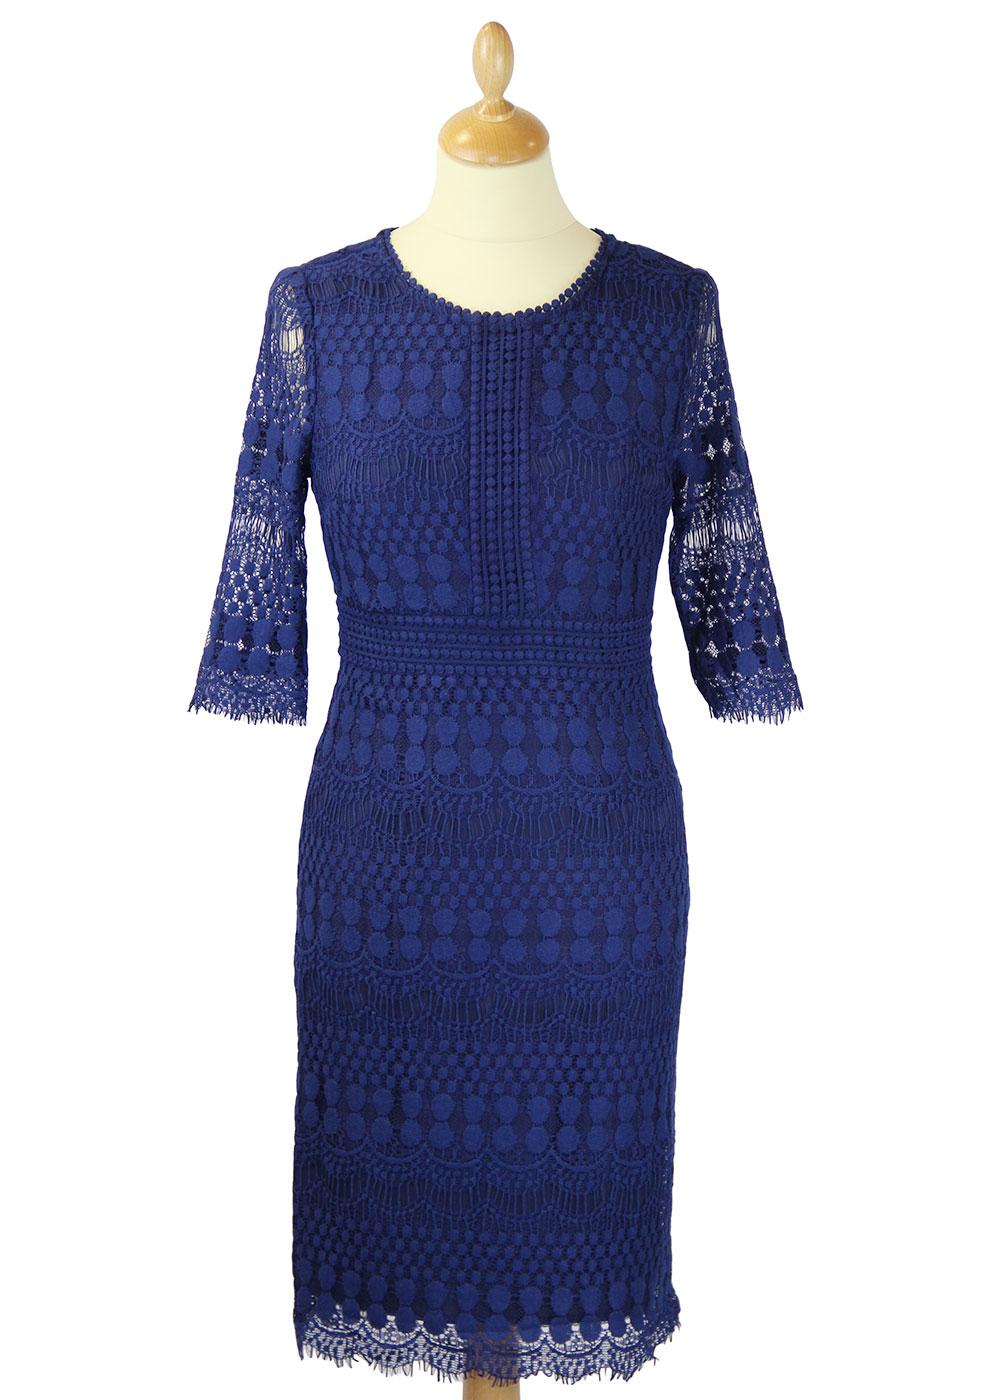 DARLING Retro 60s Mod Lace Midi Sleeve Fitted Dress in Cobalt